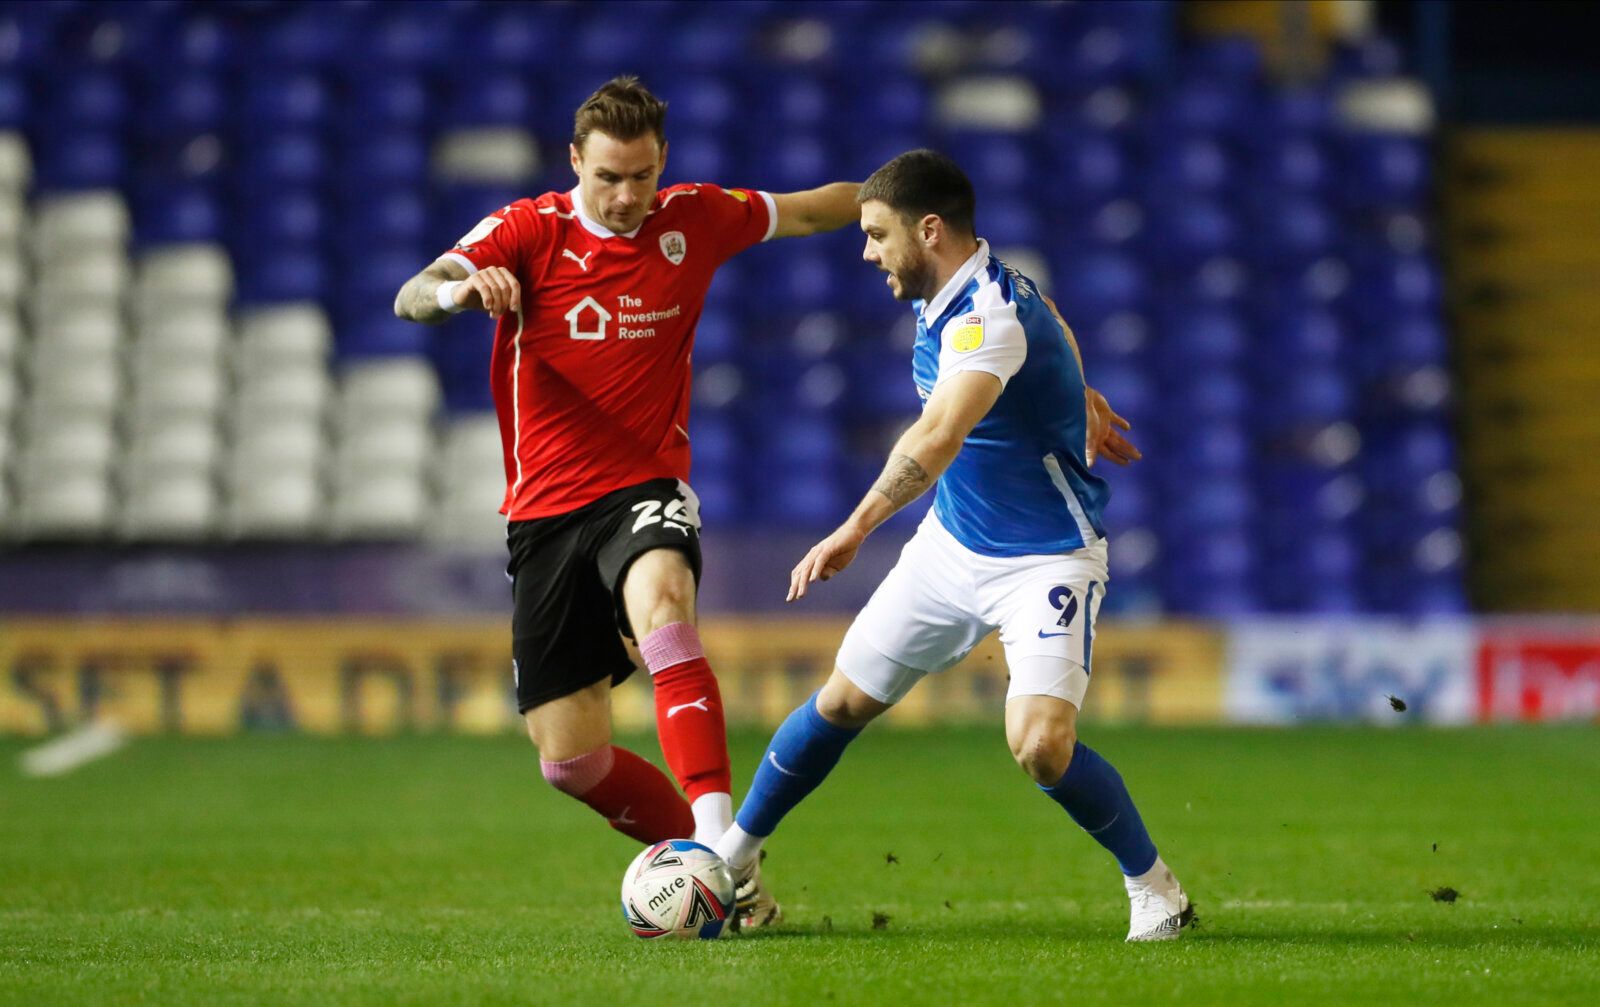 Soccer Football - Championship - Birmingham City v Barnsley - St Andrew's, Birmingham, Britain - December 1, 2020 Birmingham City's Scott Hogan in action with Barnsley's Michael Sollbauer Action Images/Matthew Childs EDITORIAL USE ONLY. No use with unauthorized audio, video, data, fixture lists, club/league logos or 'live' services. Online in-match use limited to 75 images, no video emulation. No use in betting, games or single club /league/player publications.  Please contact your account repre